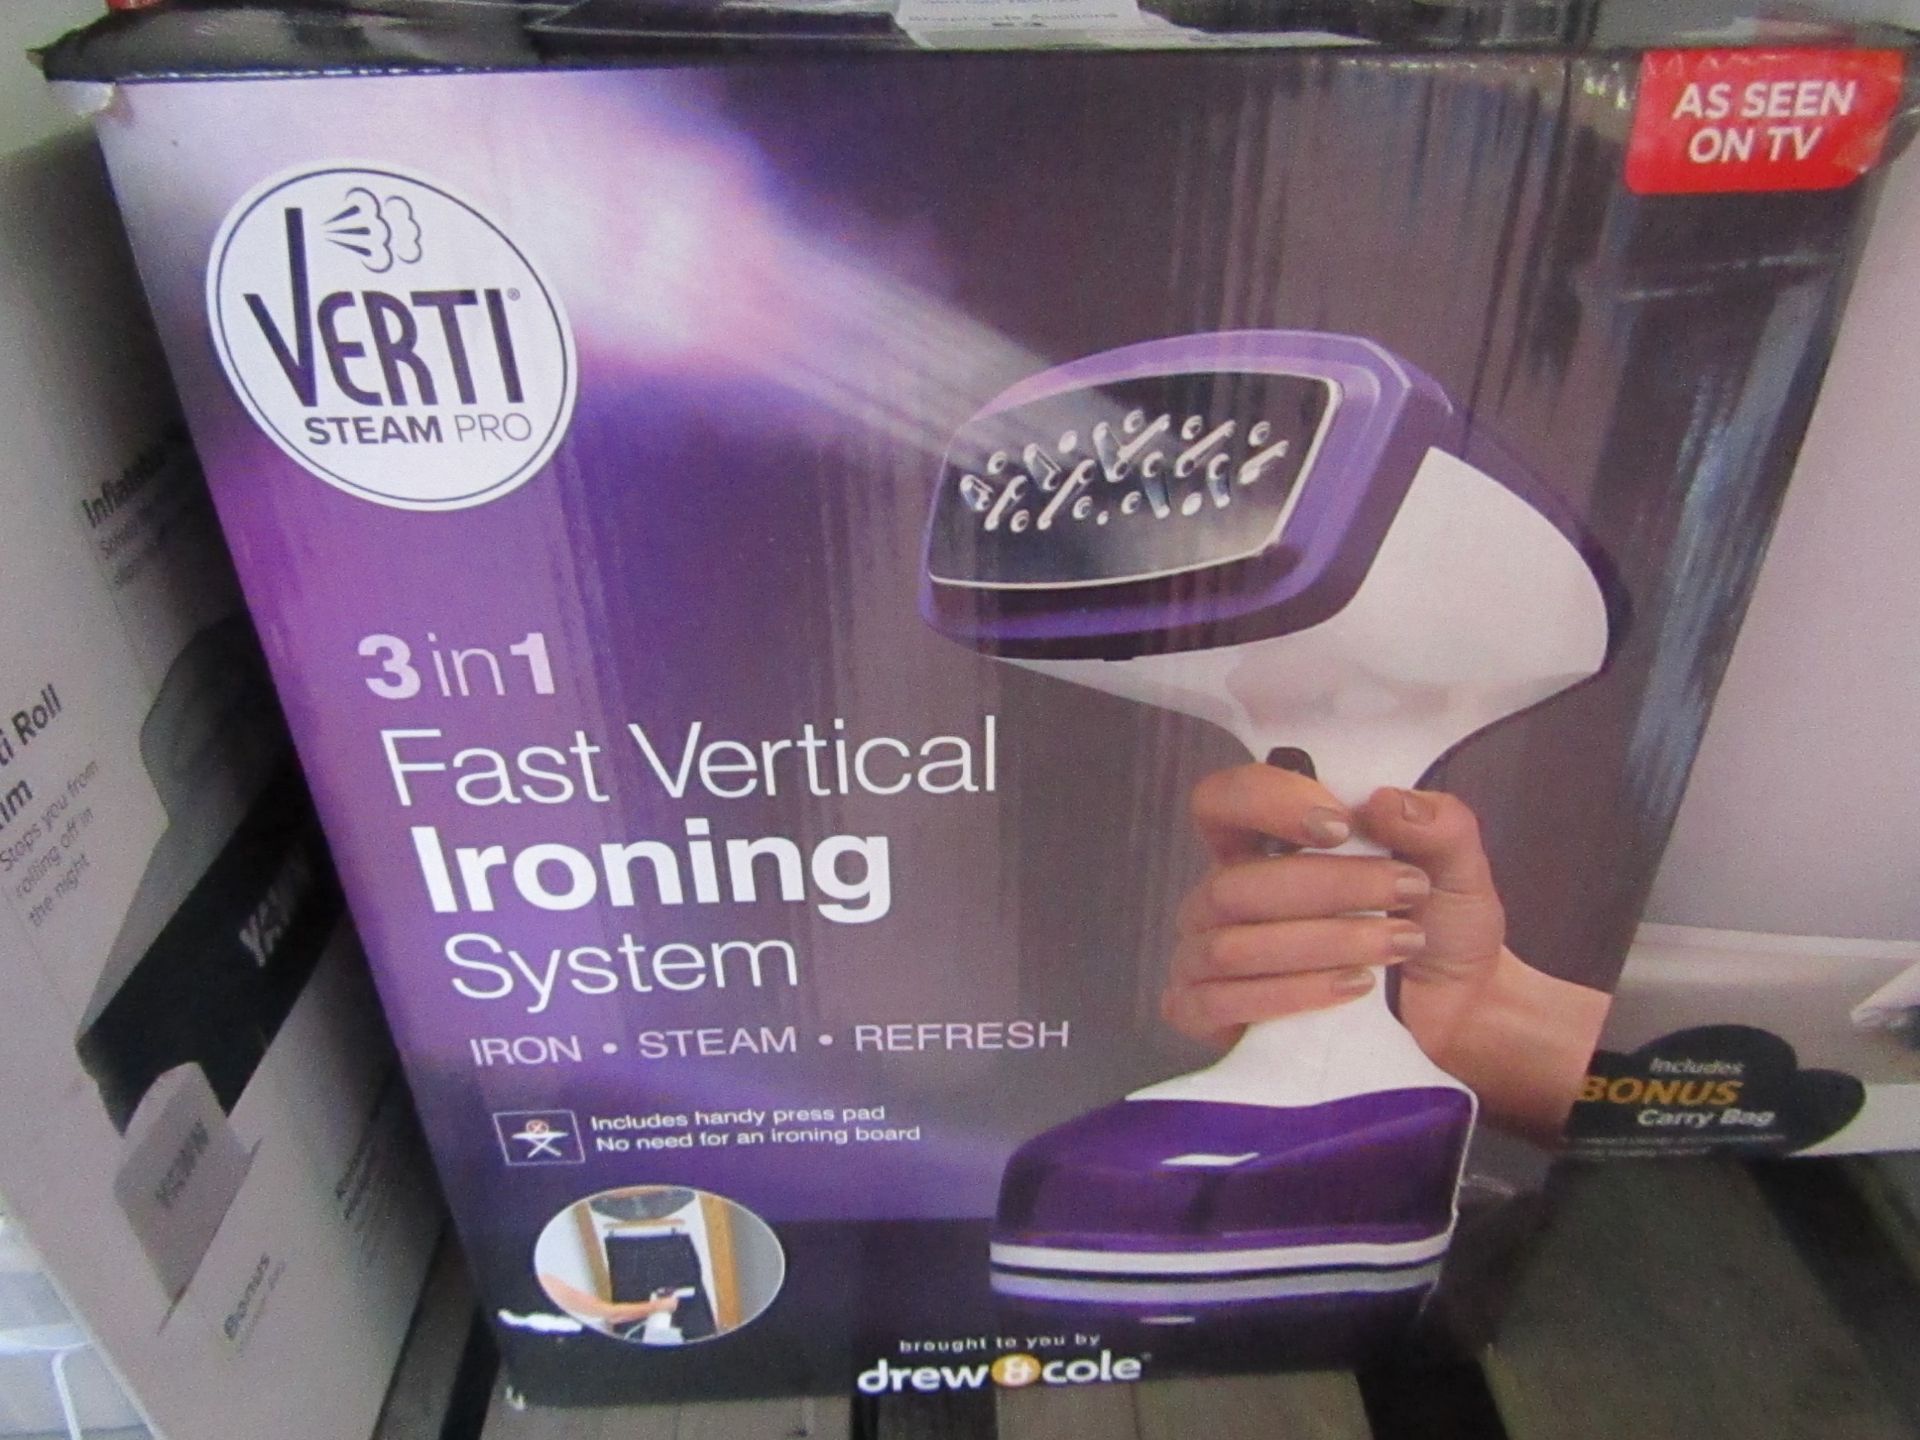 | 1x | verti steam pro | unchecked and boxed | no online re-sale | SKU C5060541510357 | RRP £39.99 |